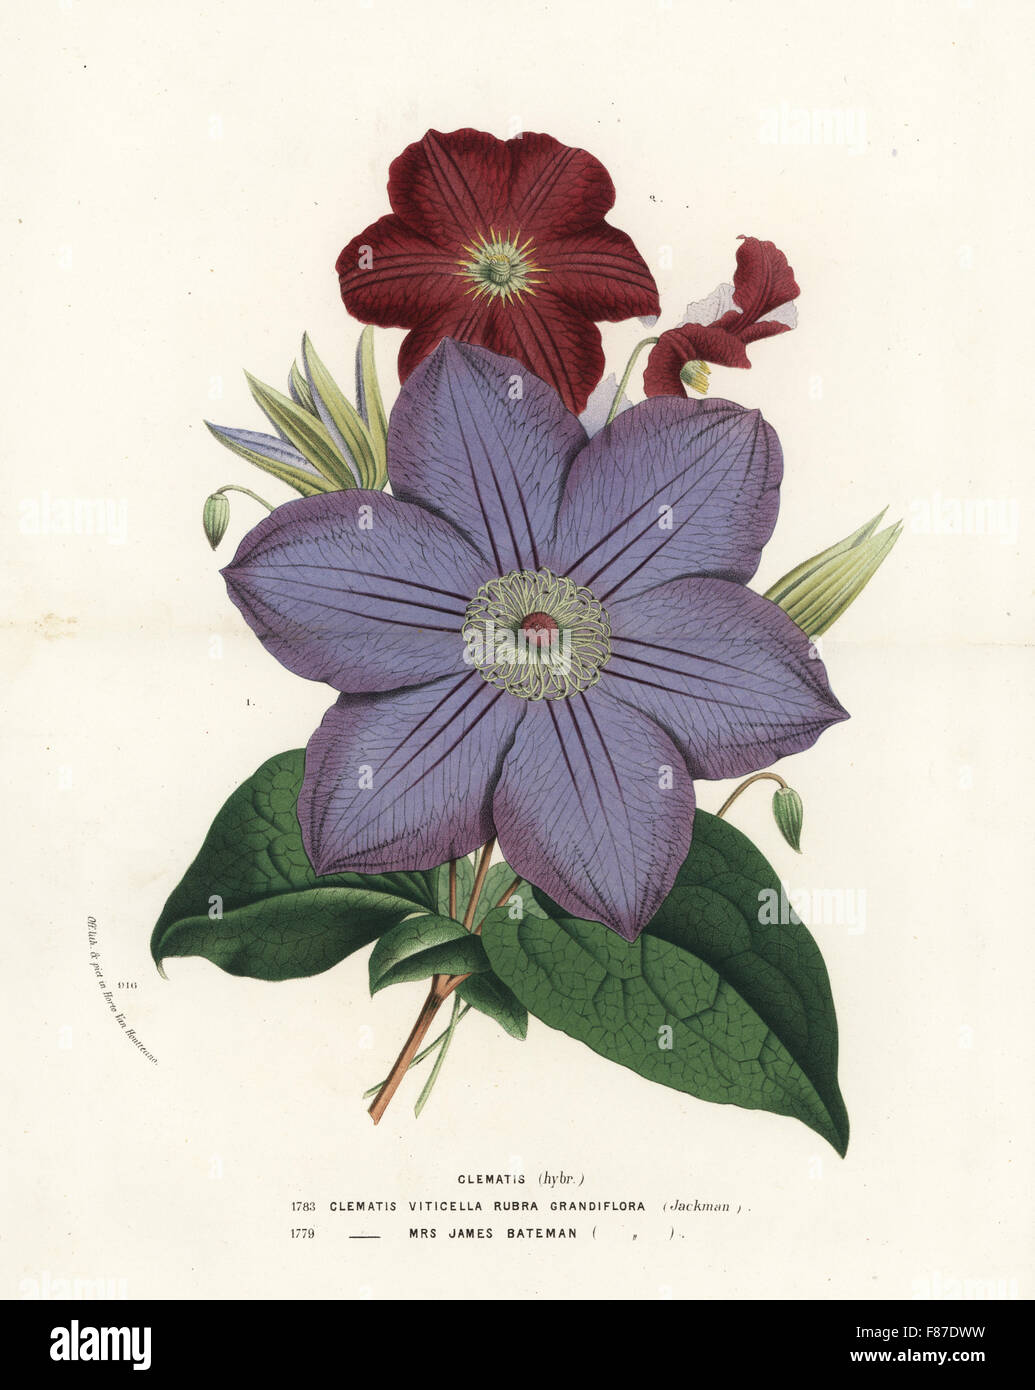 Clematis hybrids, Clematis viticella rubra grandiflora and Mrs. James Bateman variety. Handcoloured lithograph from Louis van Houtte and Charles Lemaire's Flowers of the Gardens and Hothouses of Europe, Flore des Serres et des Jardins de l'Europe, Ghent, Belgium, 1874. Stock Photo